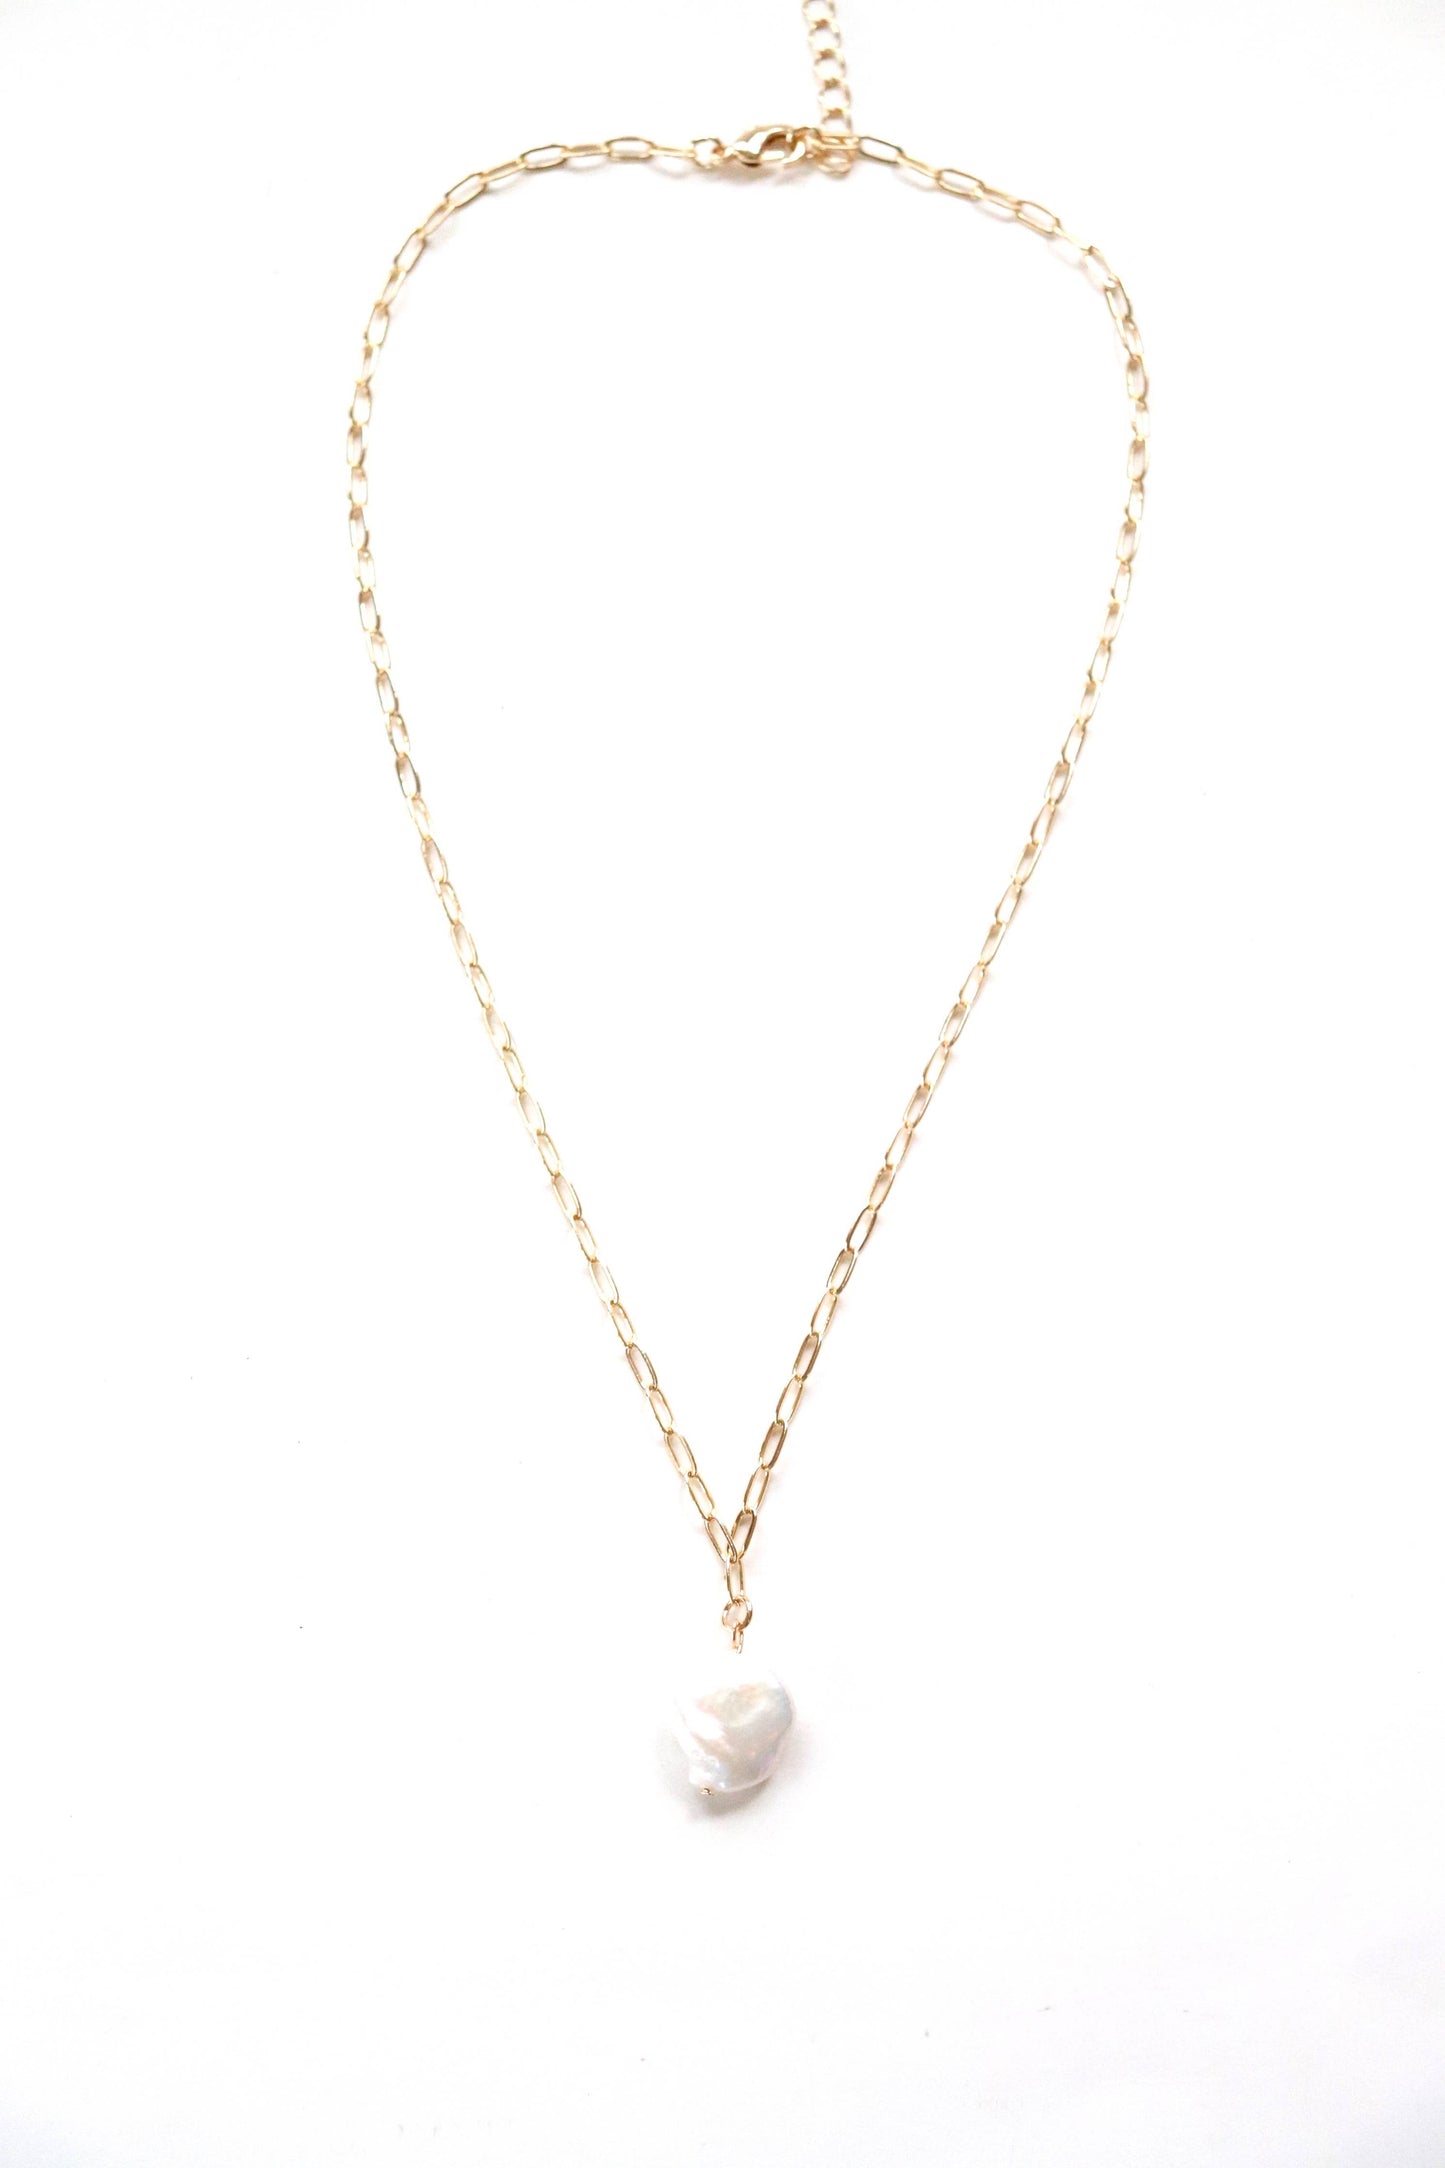 Gold Chain Necklace With a Pearl